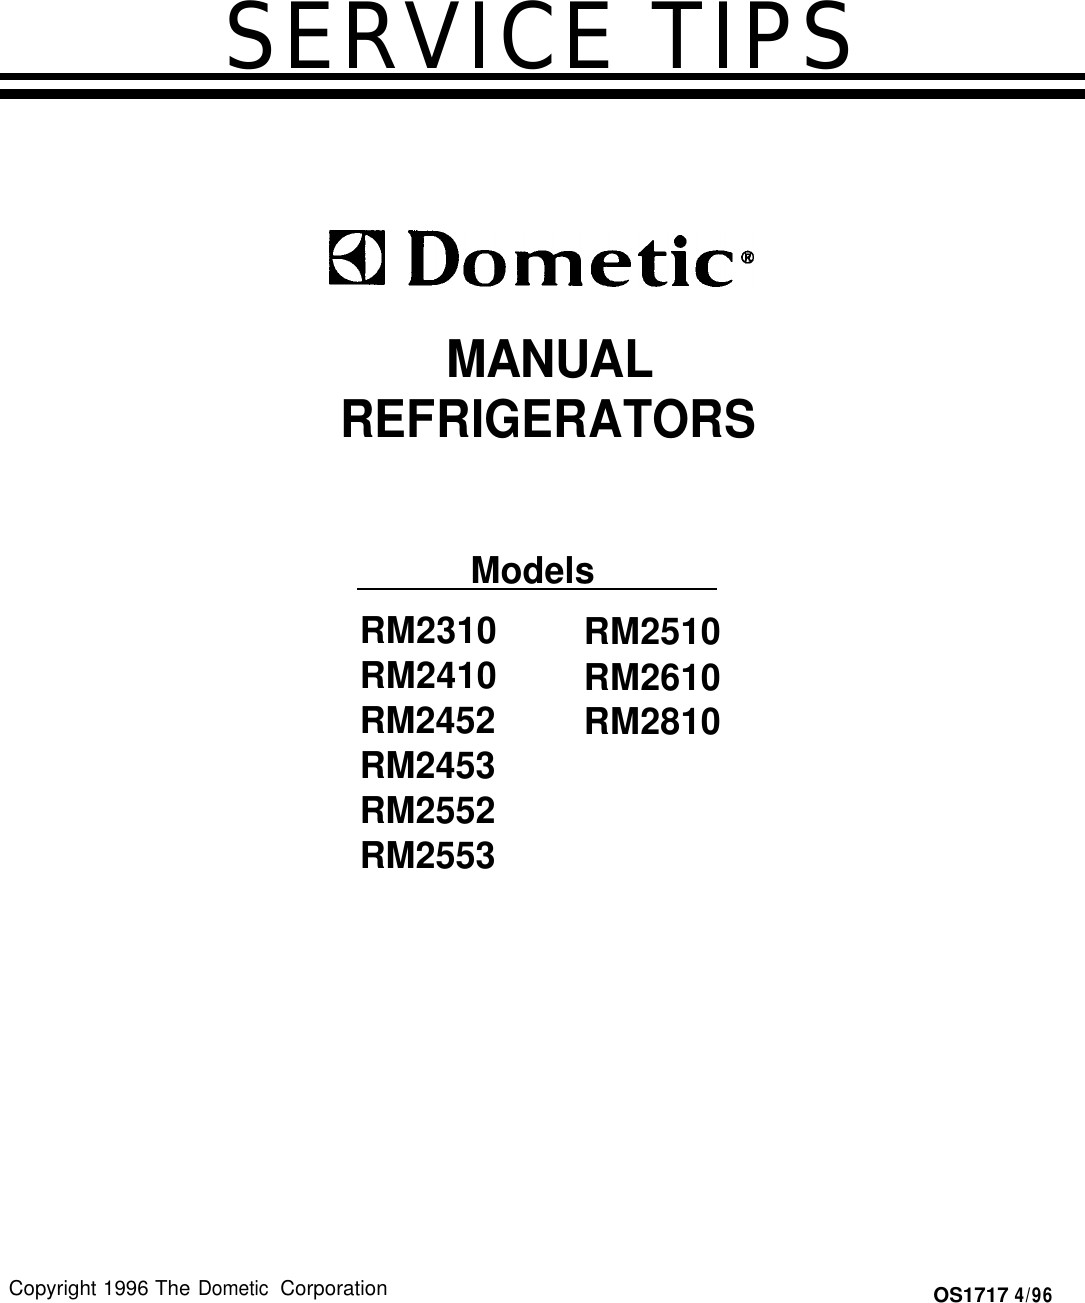 Dometic Rm2310 Service Manual ManualsLib Makes It Easy To Find Manuals